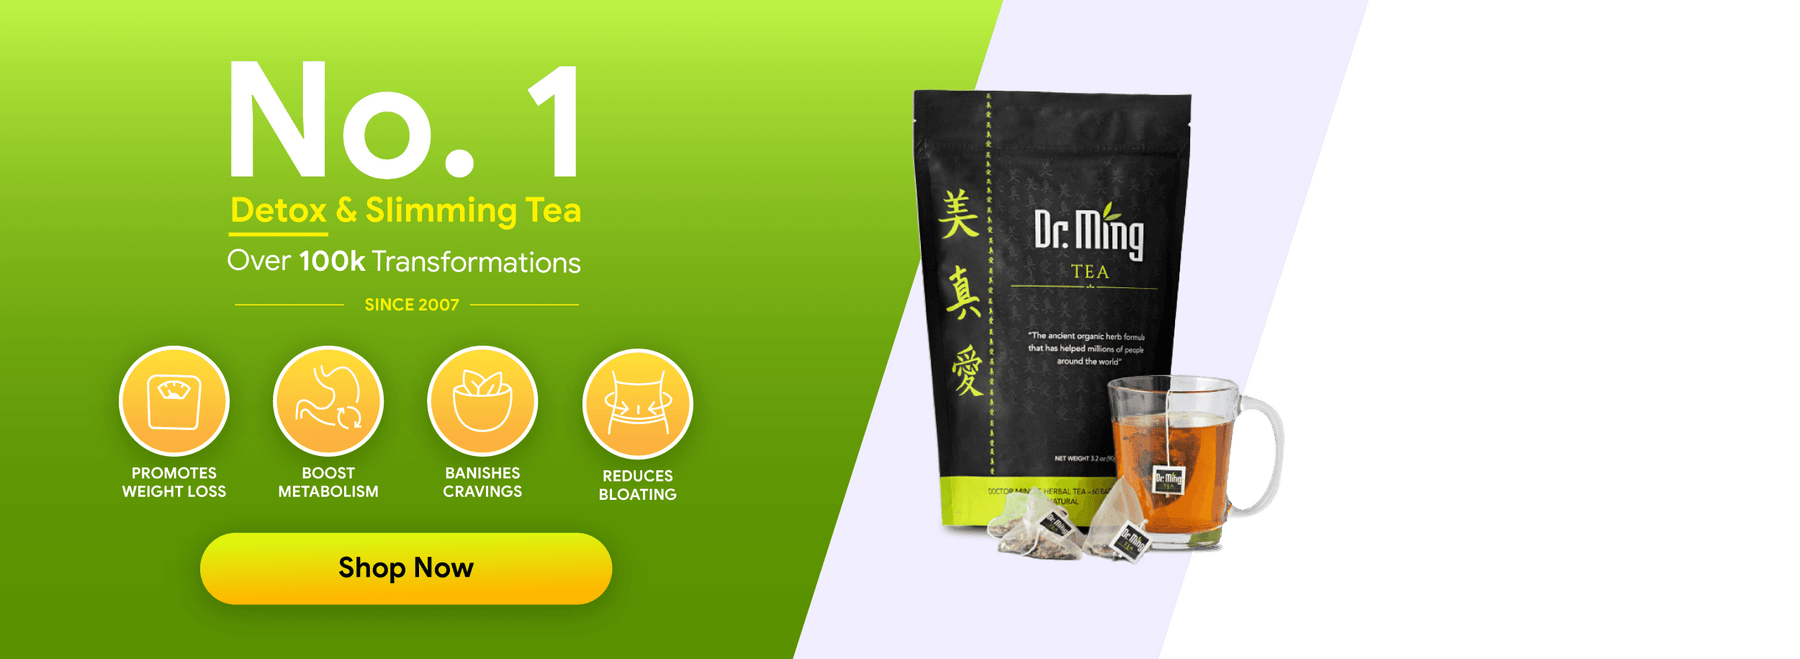 Dr. Ming Tea Review  Can Tea Actually Be Slimming? – Illuminate Labs